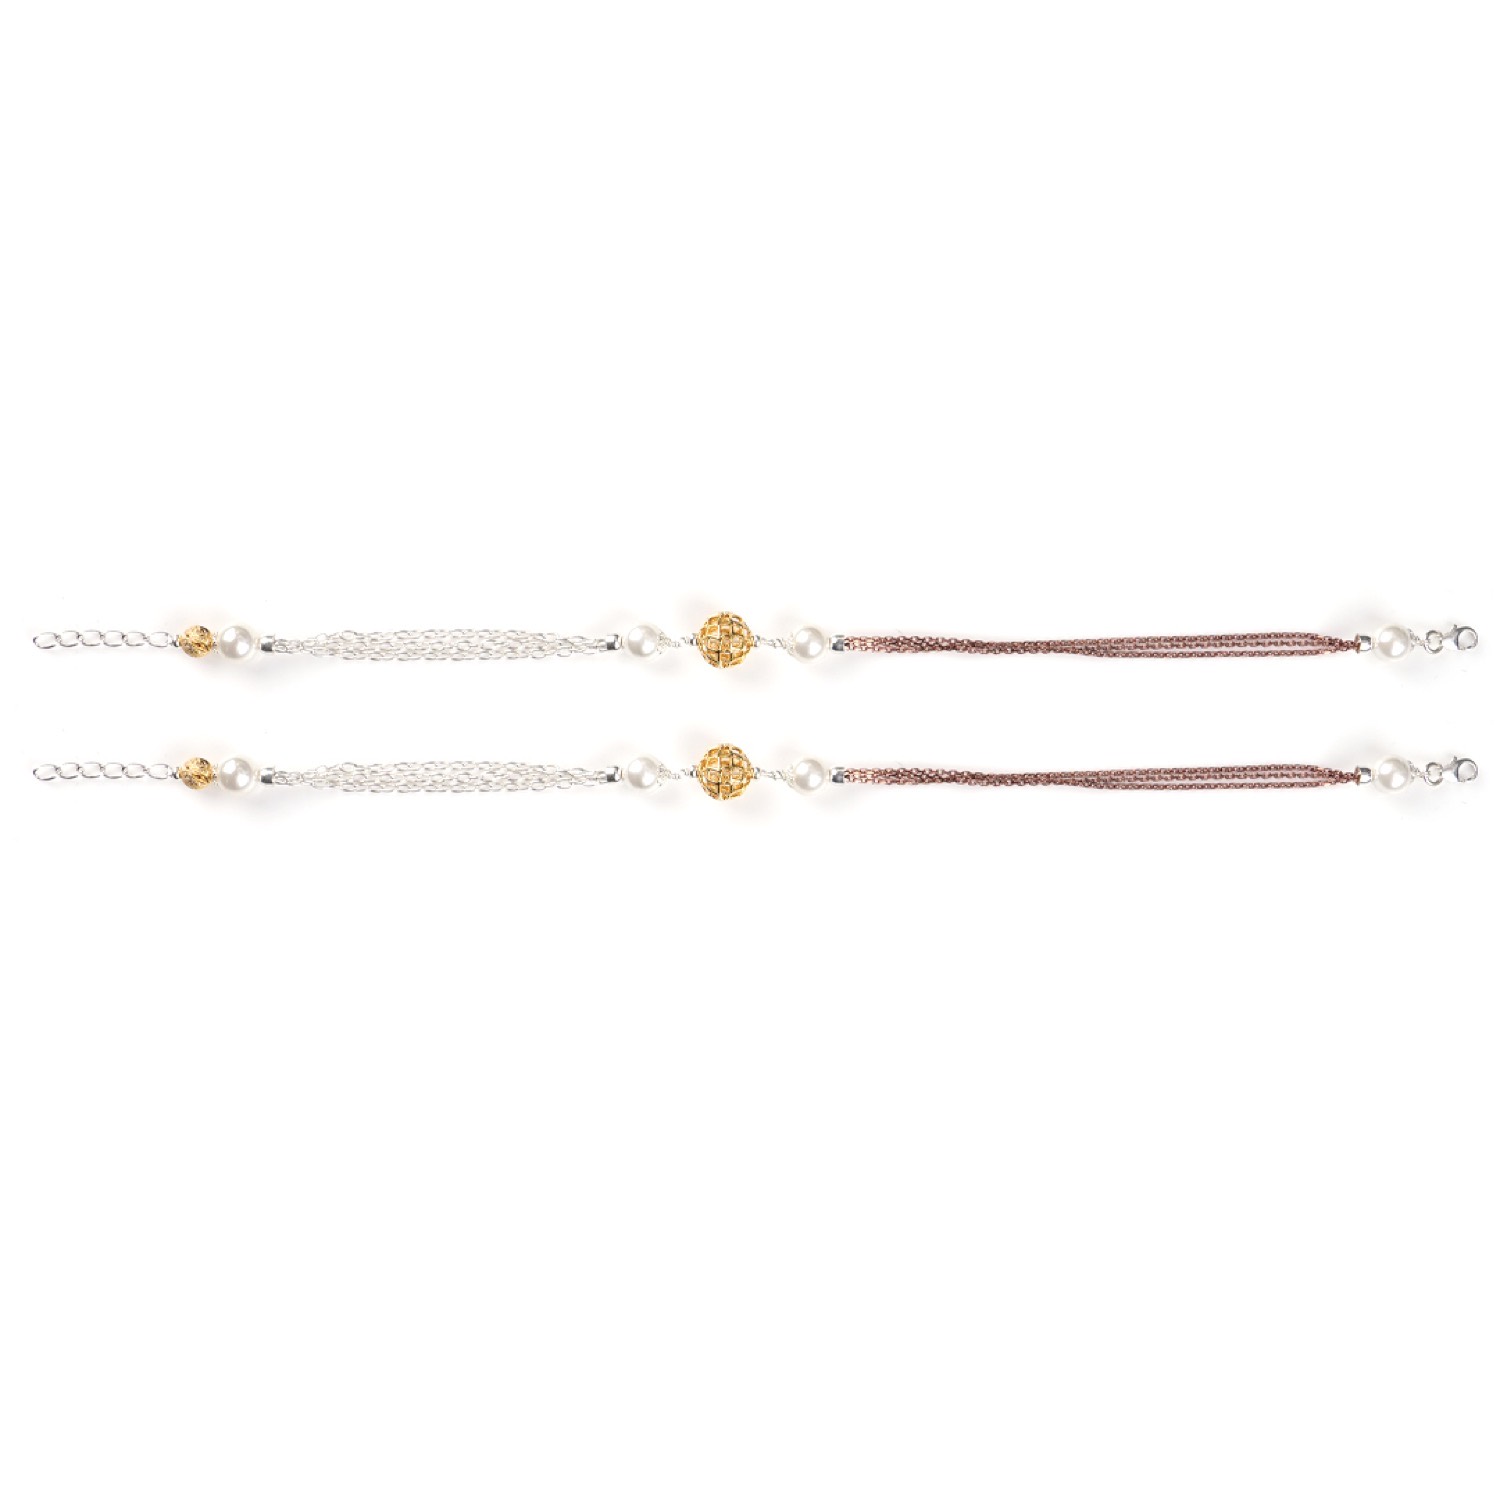 varam_anklets_072022_yellow_stone_silver_copper_anklets_1-1